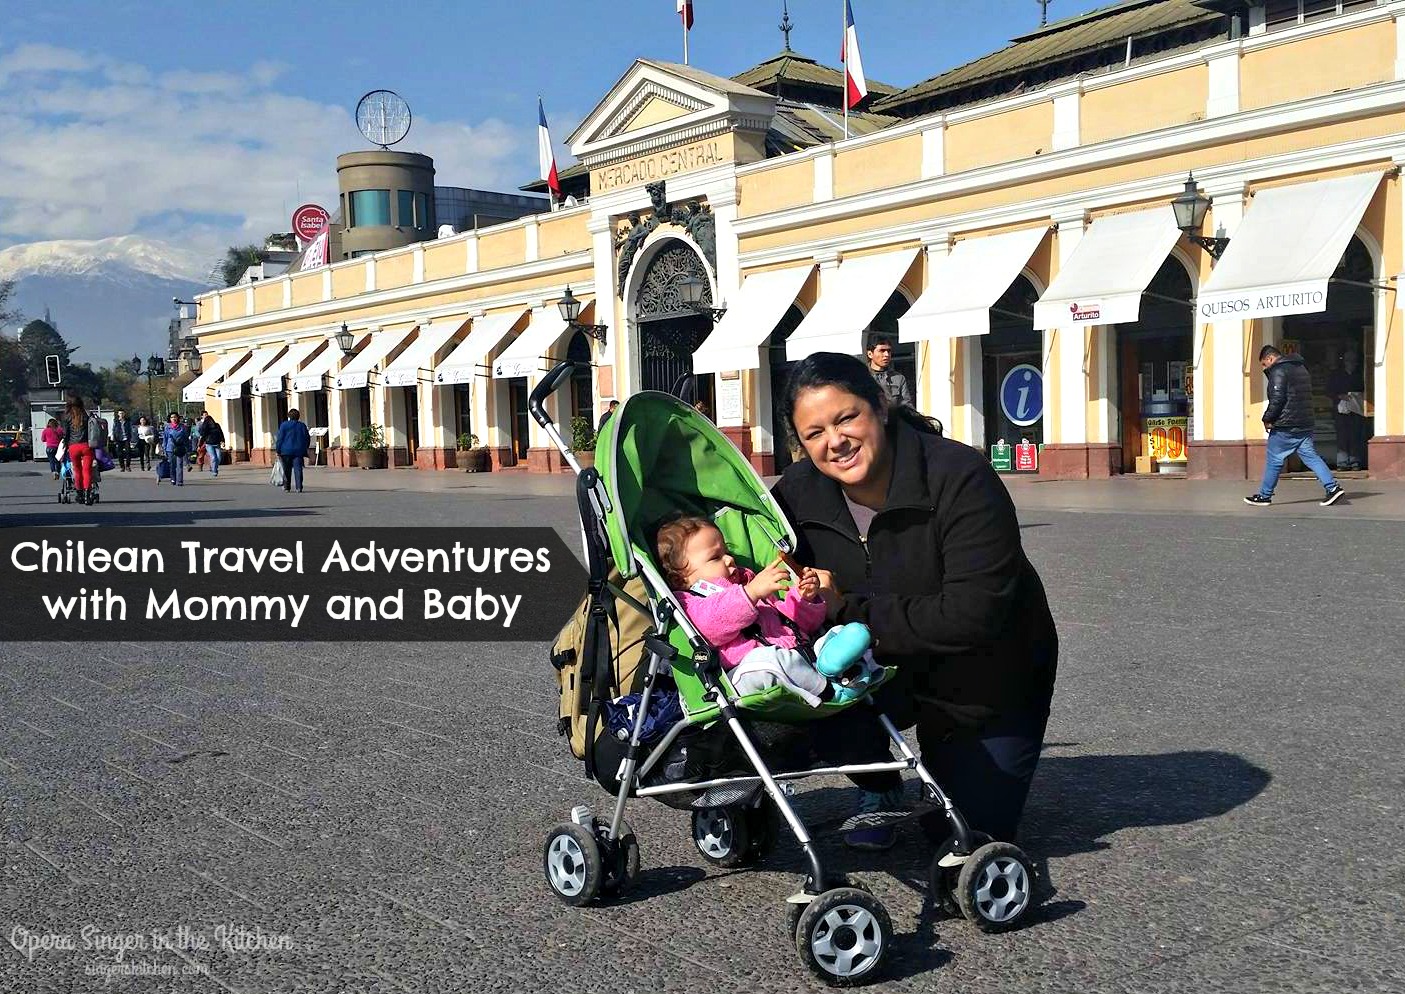 Chilean Travel Adventures with Mommy and Baby